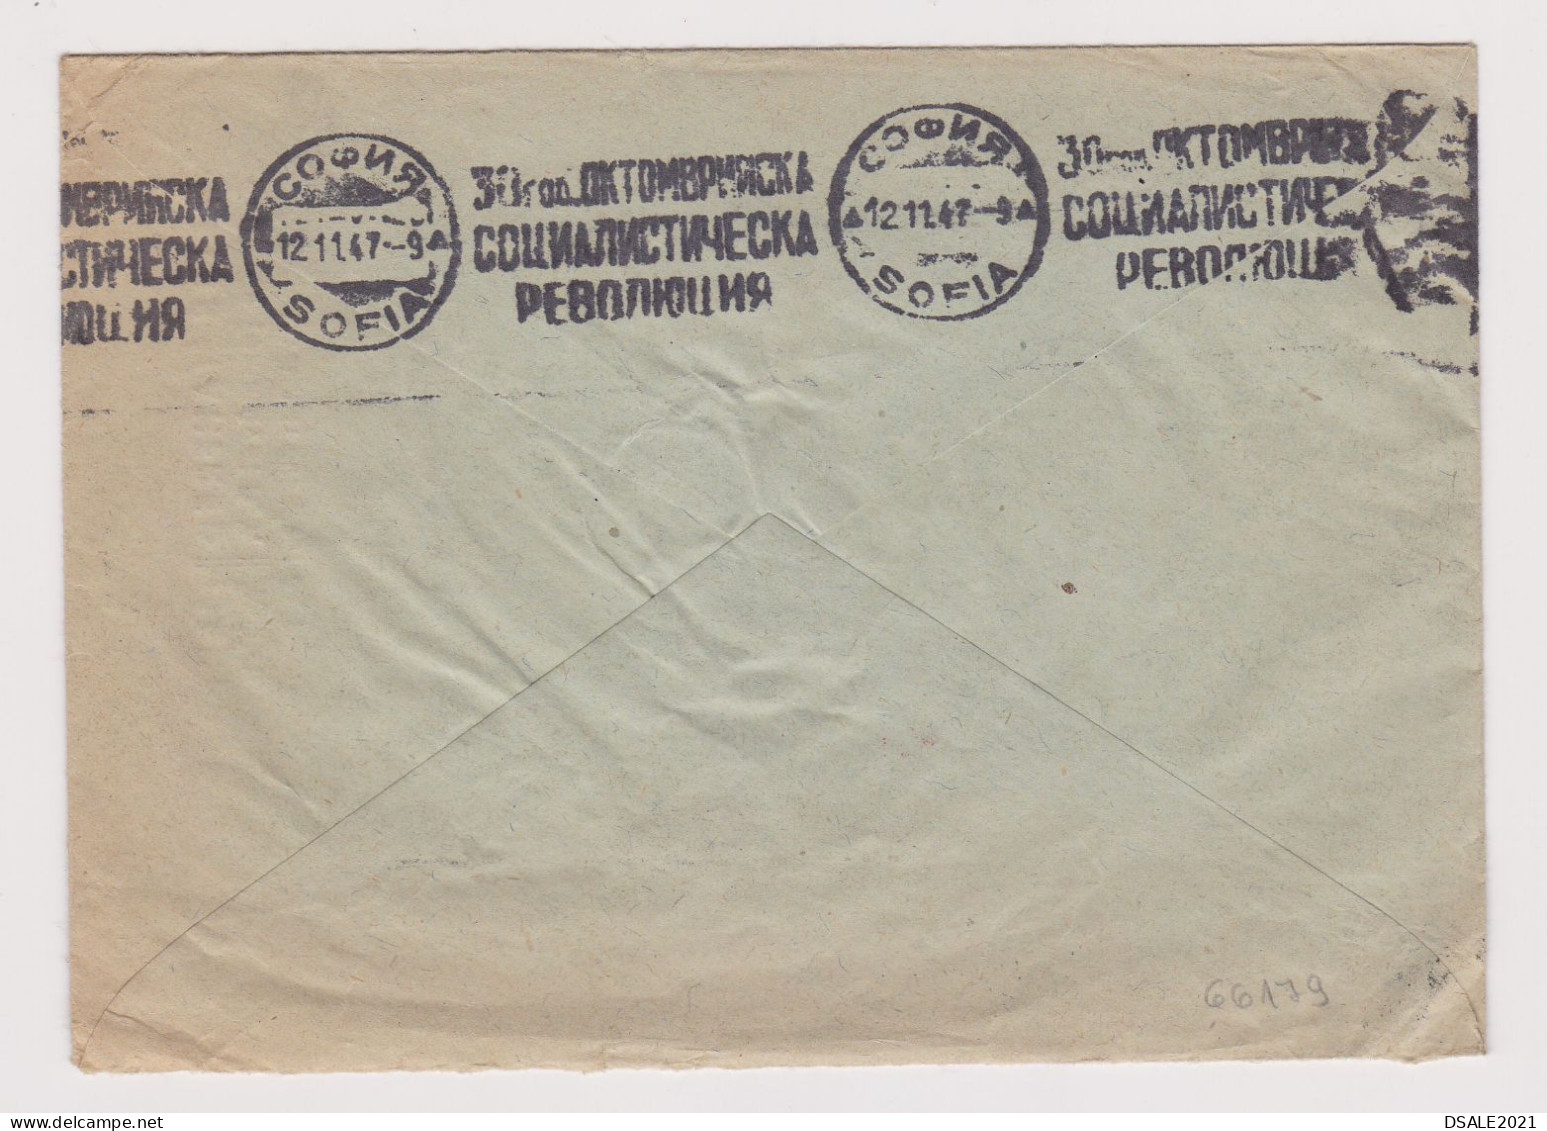 Hungary 1947 Commerce Window Cover Machine EMA METER Stamp Cachet WEISS MANFRED Sent Abroad To Bulgaria (66179) - Viñetas De Franqueo [ATM]